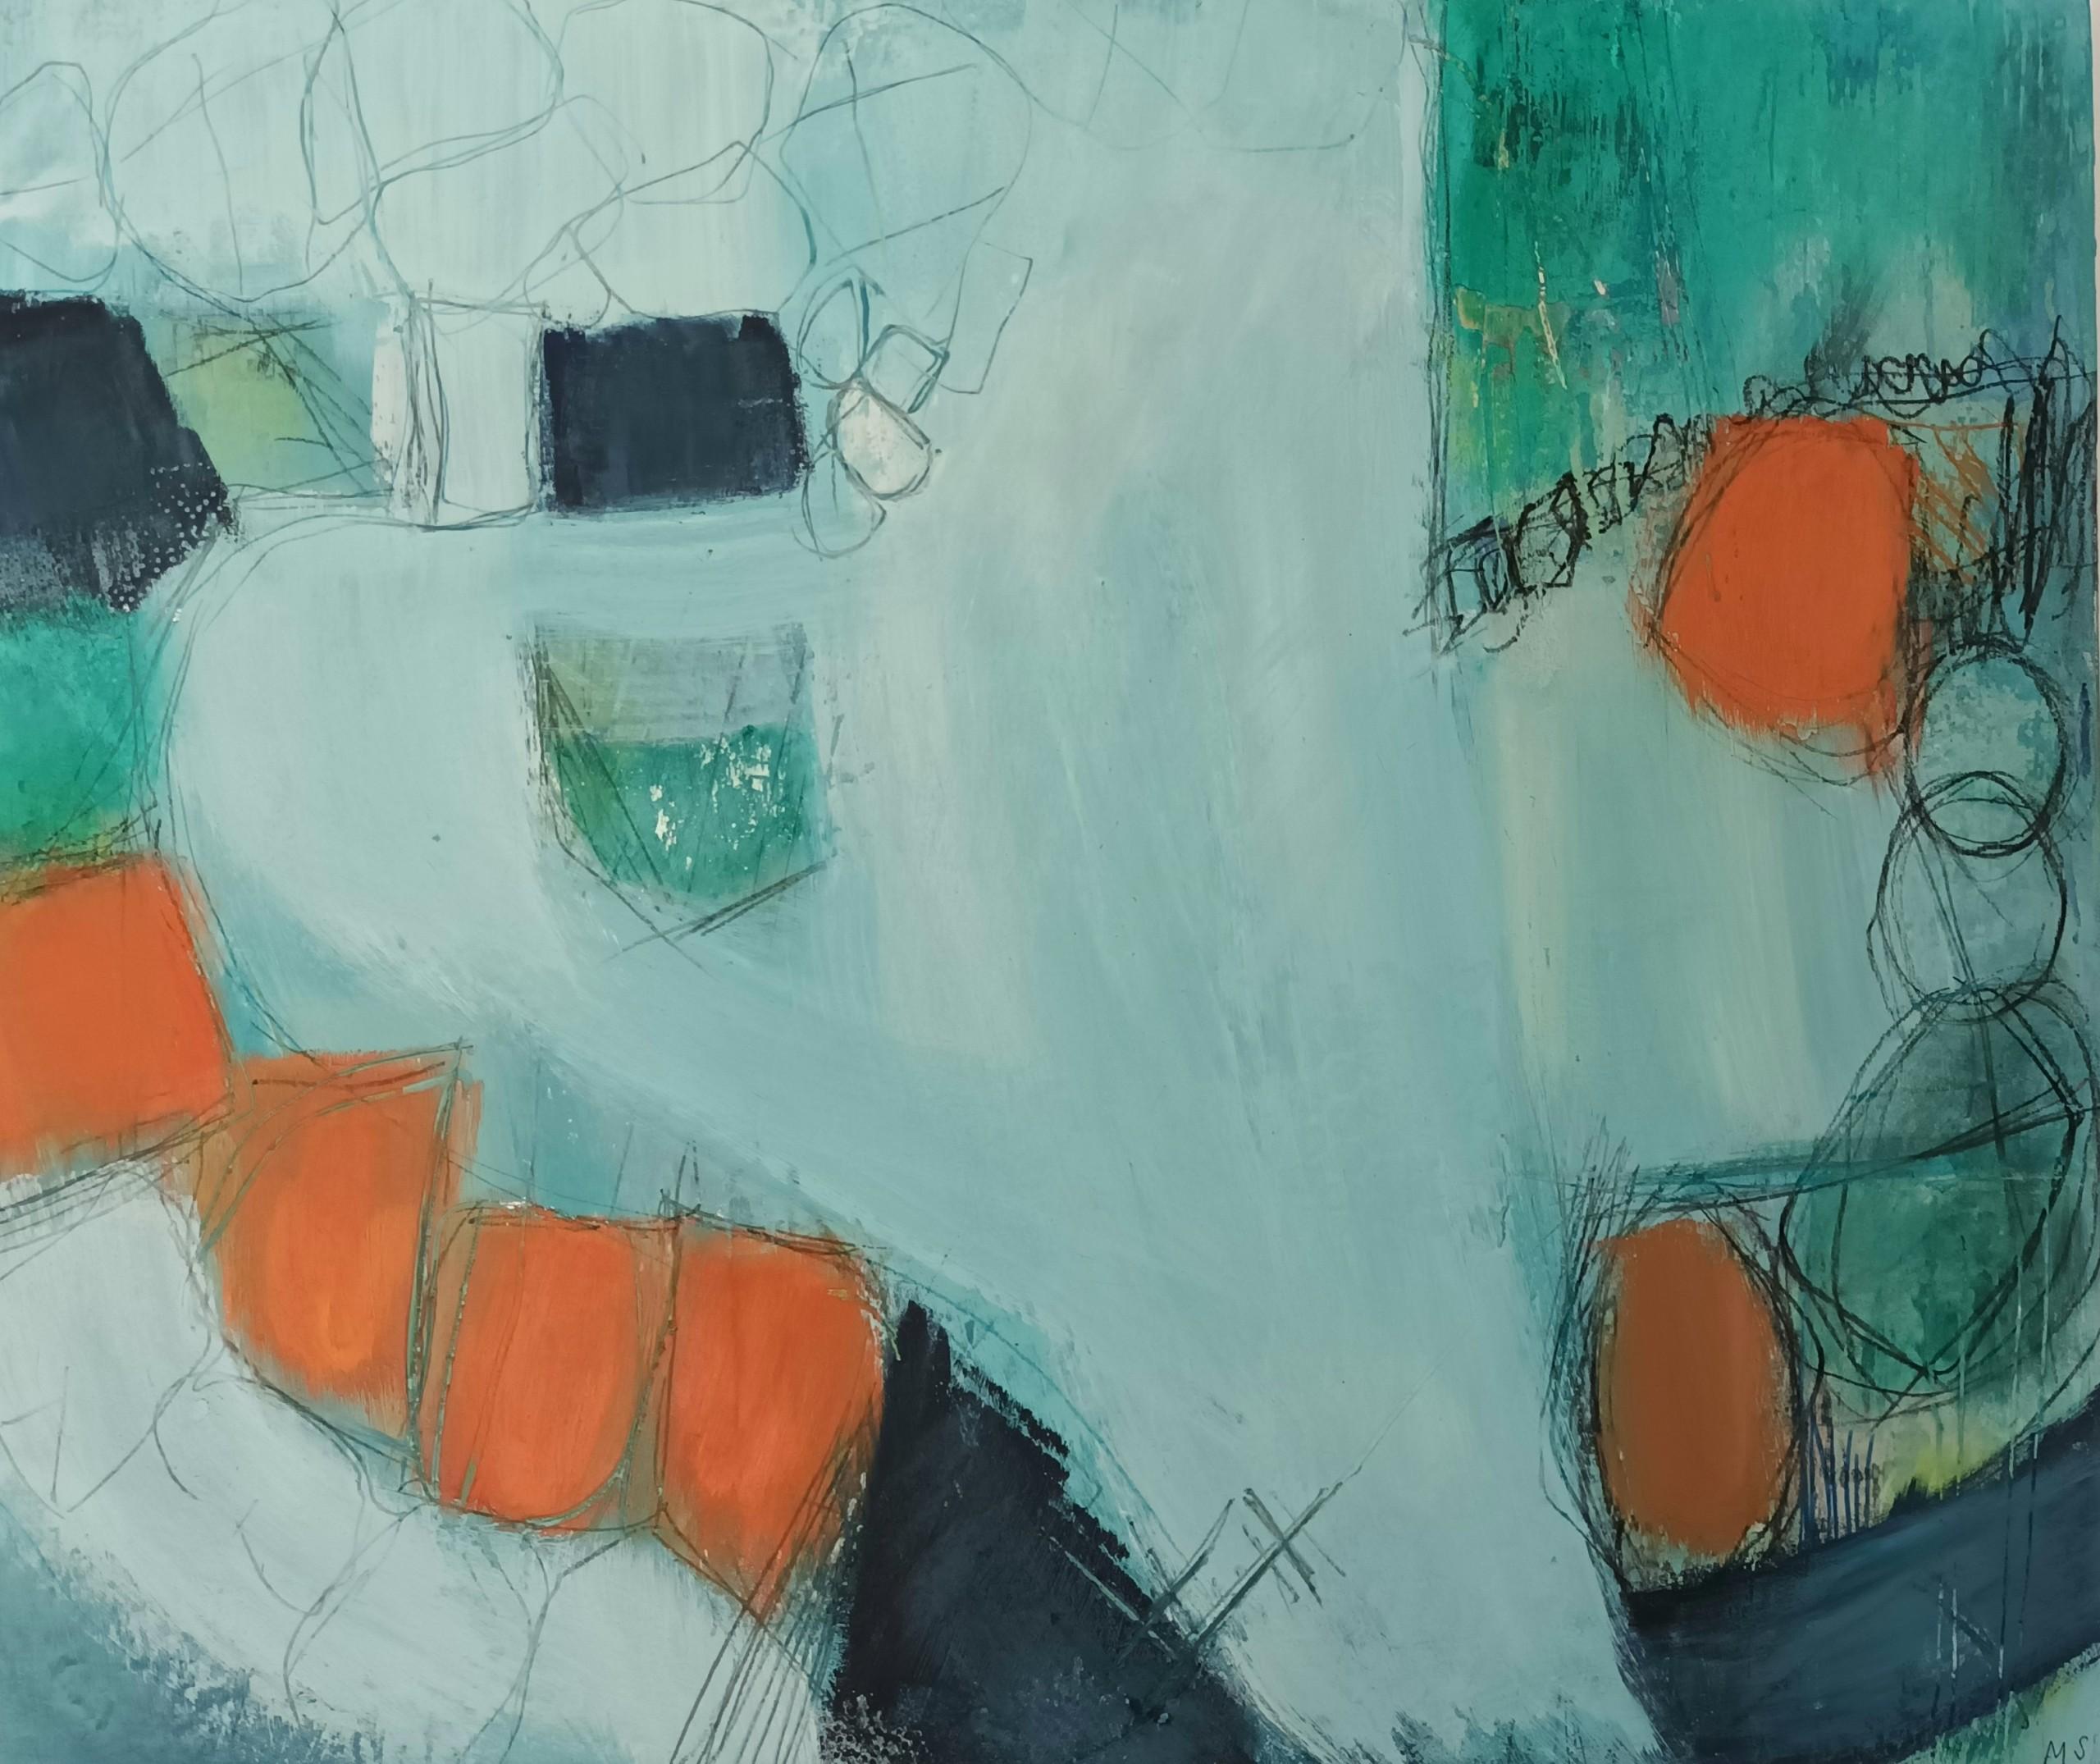 Zennor Calling IV by Mary Scott, Landscape painting, Abstract, Contemporary